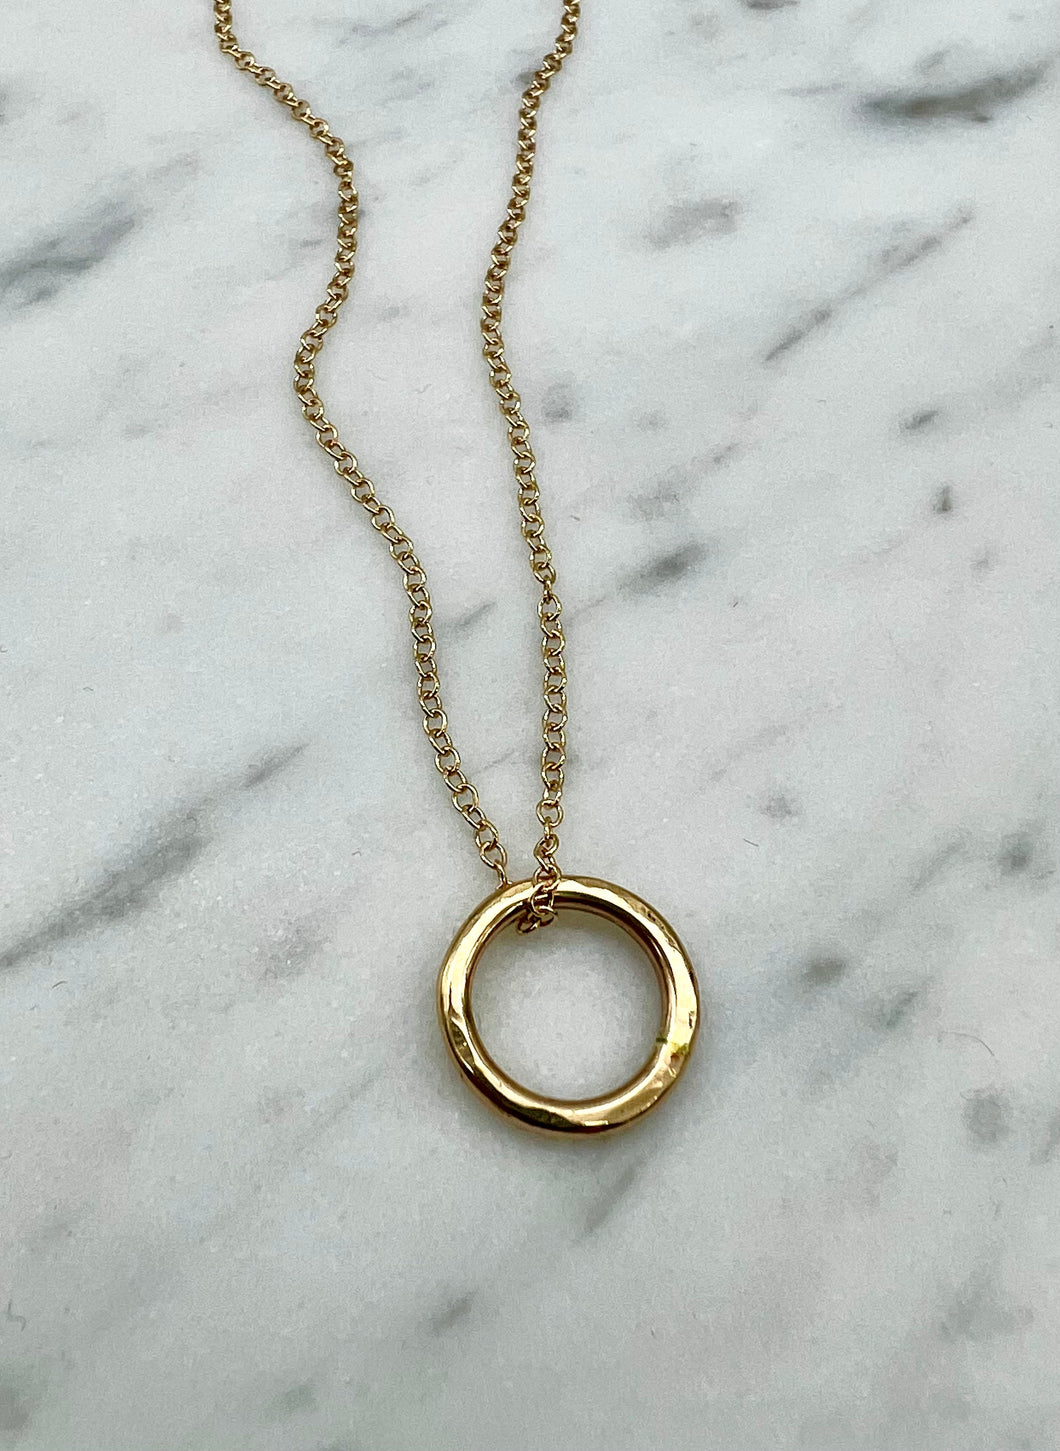 Gold Circle pendent necklace, delicate gold necklace, hammered gold ring, rustic elegant jewelry, gold ring, handmade